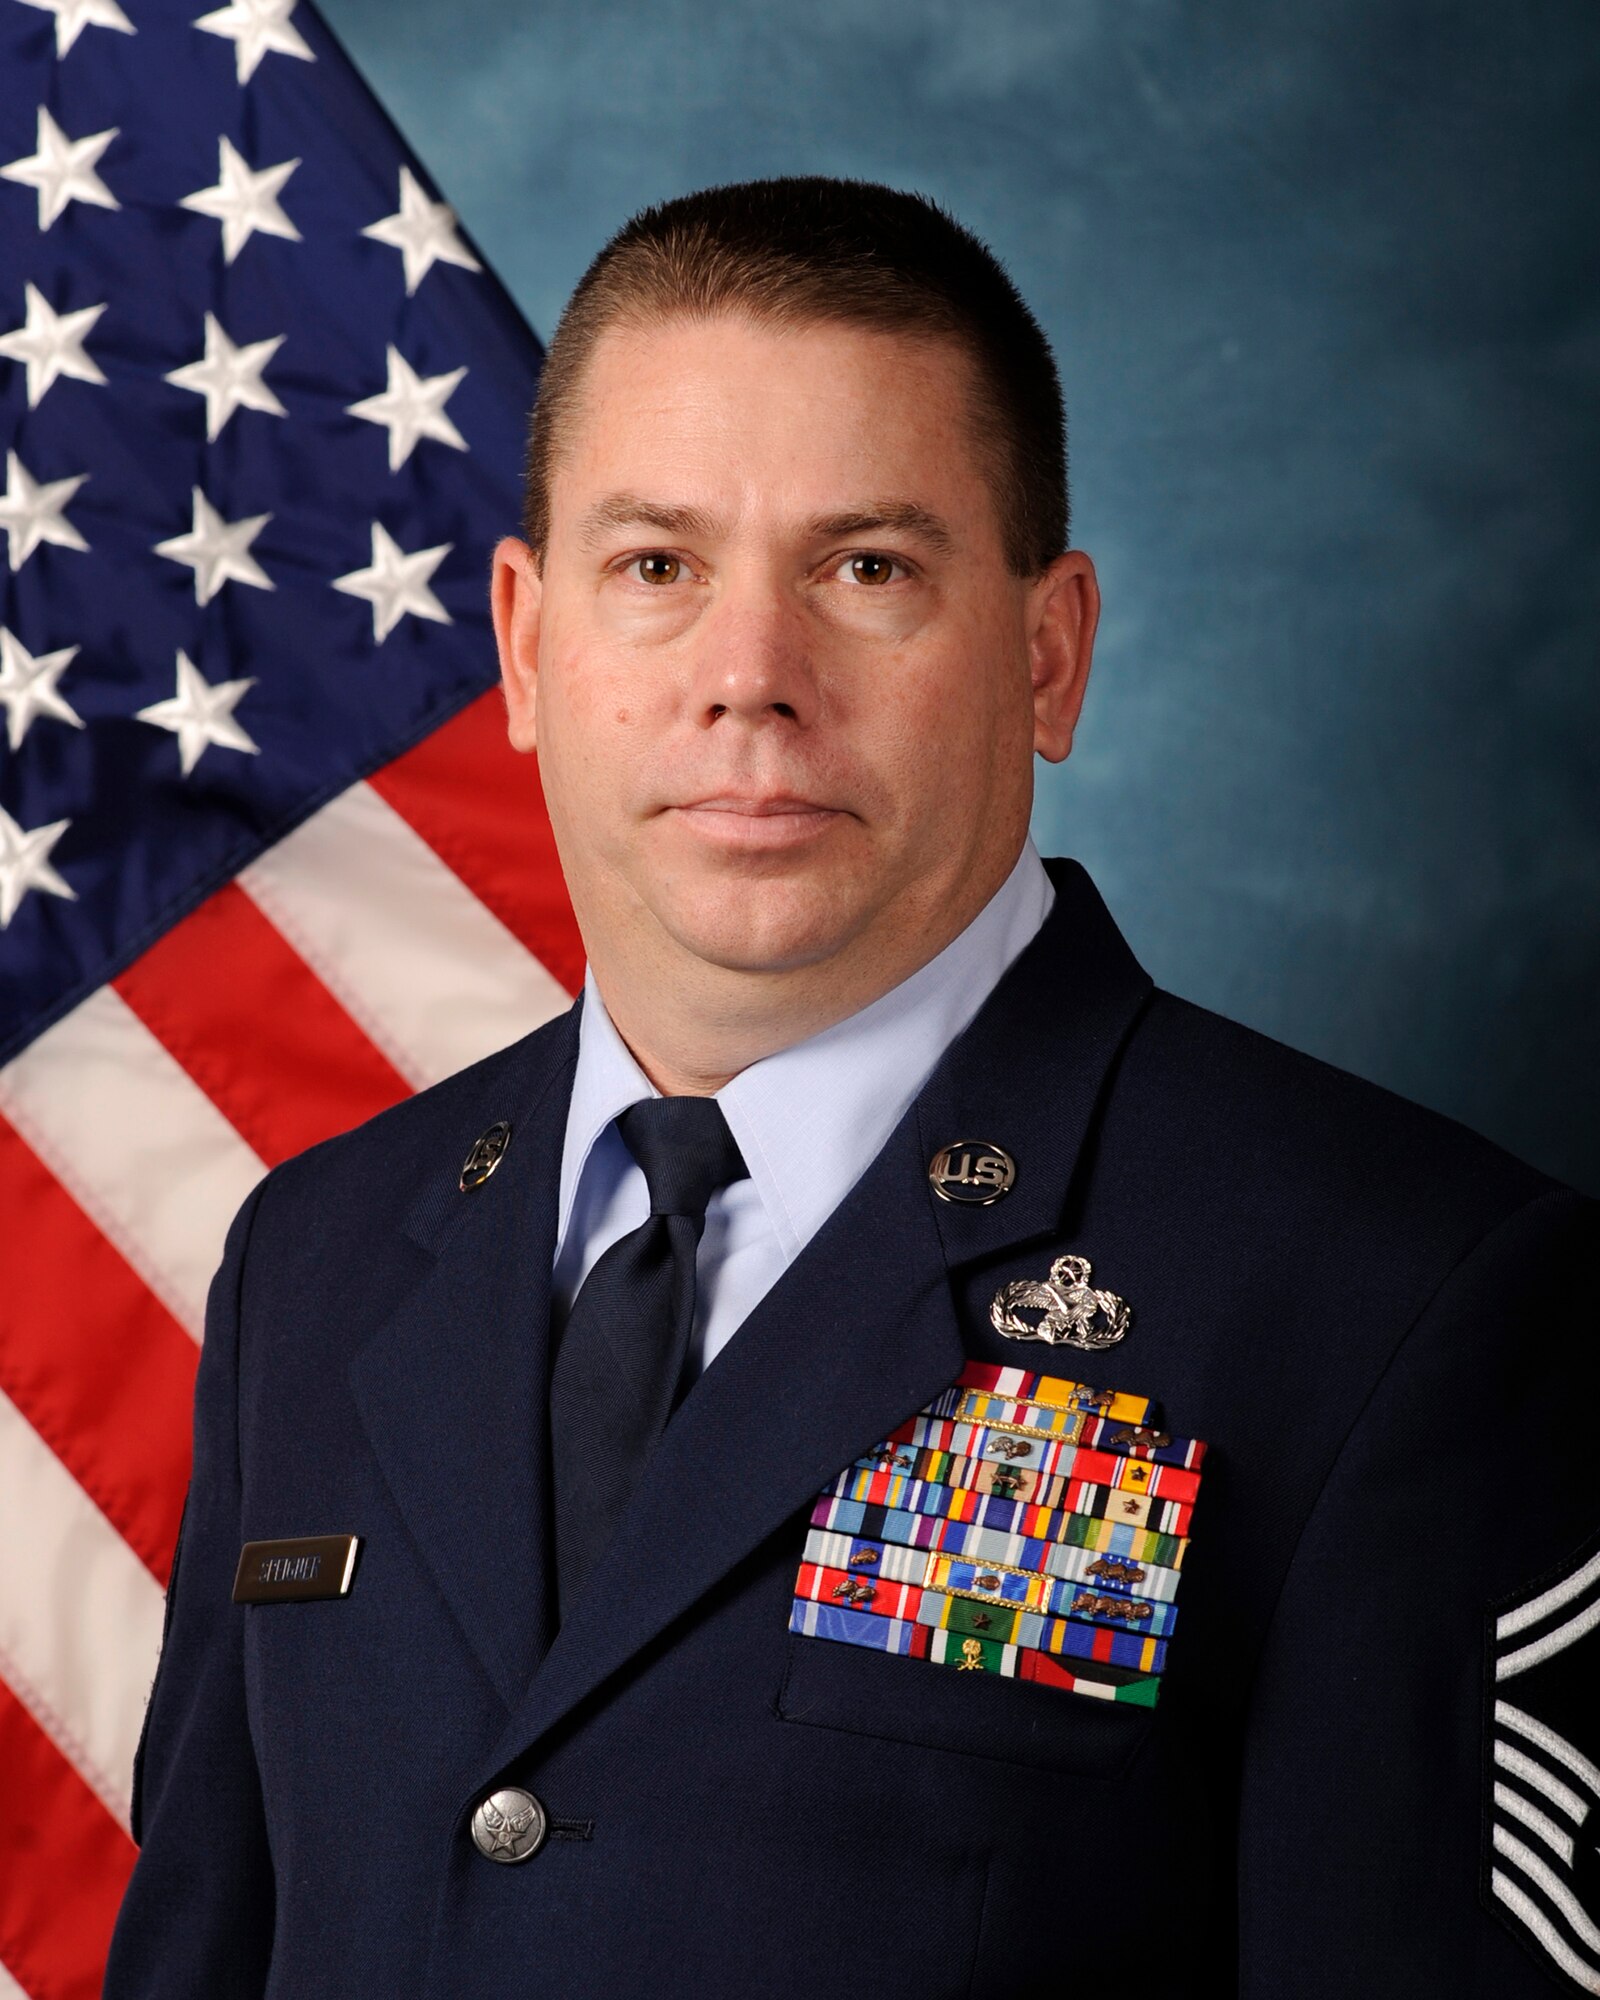 OFFUTT AIR FORCE BASE, Neb. -- Senior Master Sgt. Robert W. Speigner, from Langly AFB, Va., is one of 29 Airmen nominated for awards who will attend the 2010 Air Combat Command Outstanding Airmen of the Year Awards Banquet in Omaha, Neb., April 21. Sergeant Speigner is nominated for the SNCO of the Year Award. U.S. Air Force courtesy photo